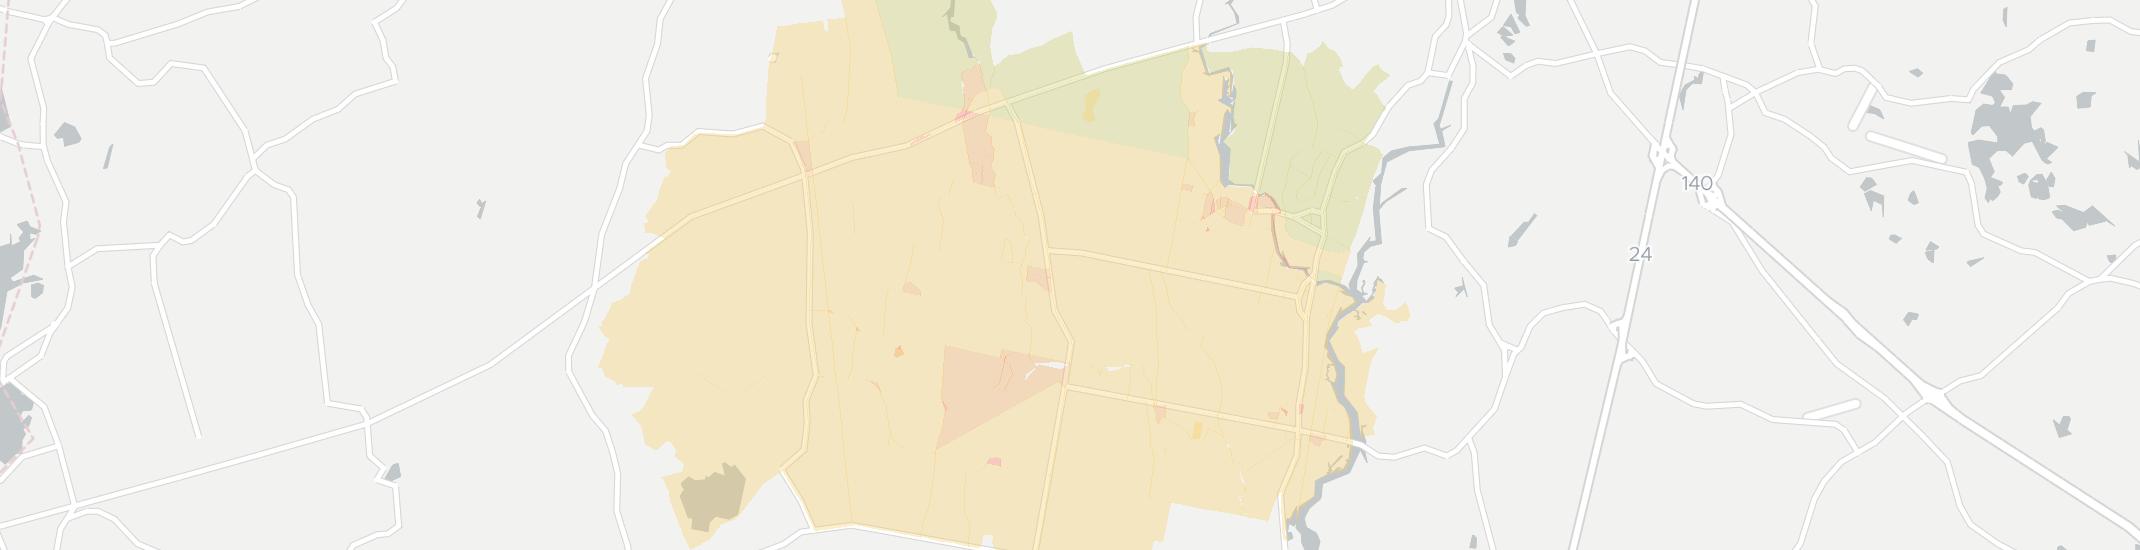 North Dighton Internet Competition Map. Click for interactive map